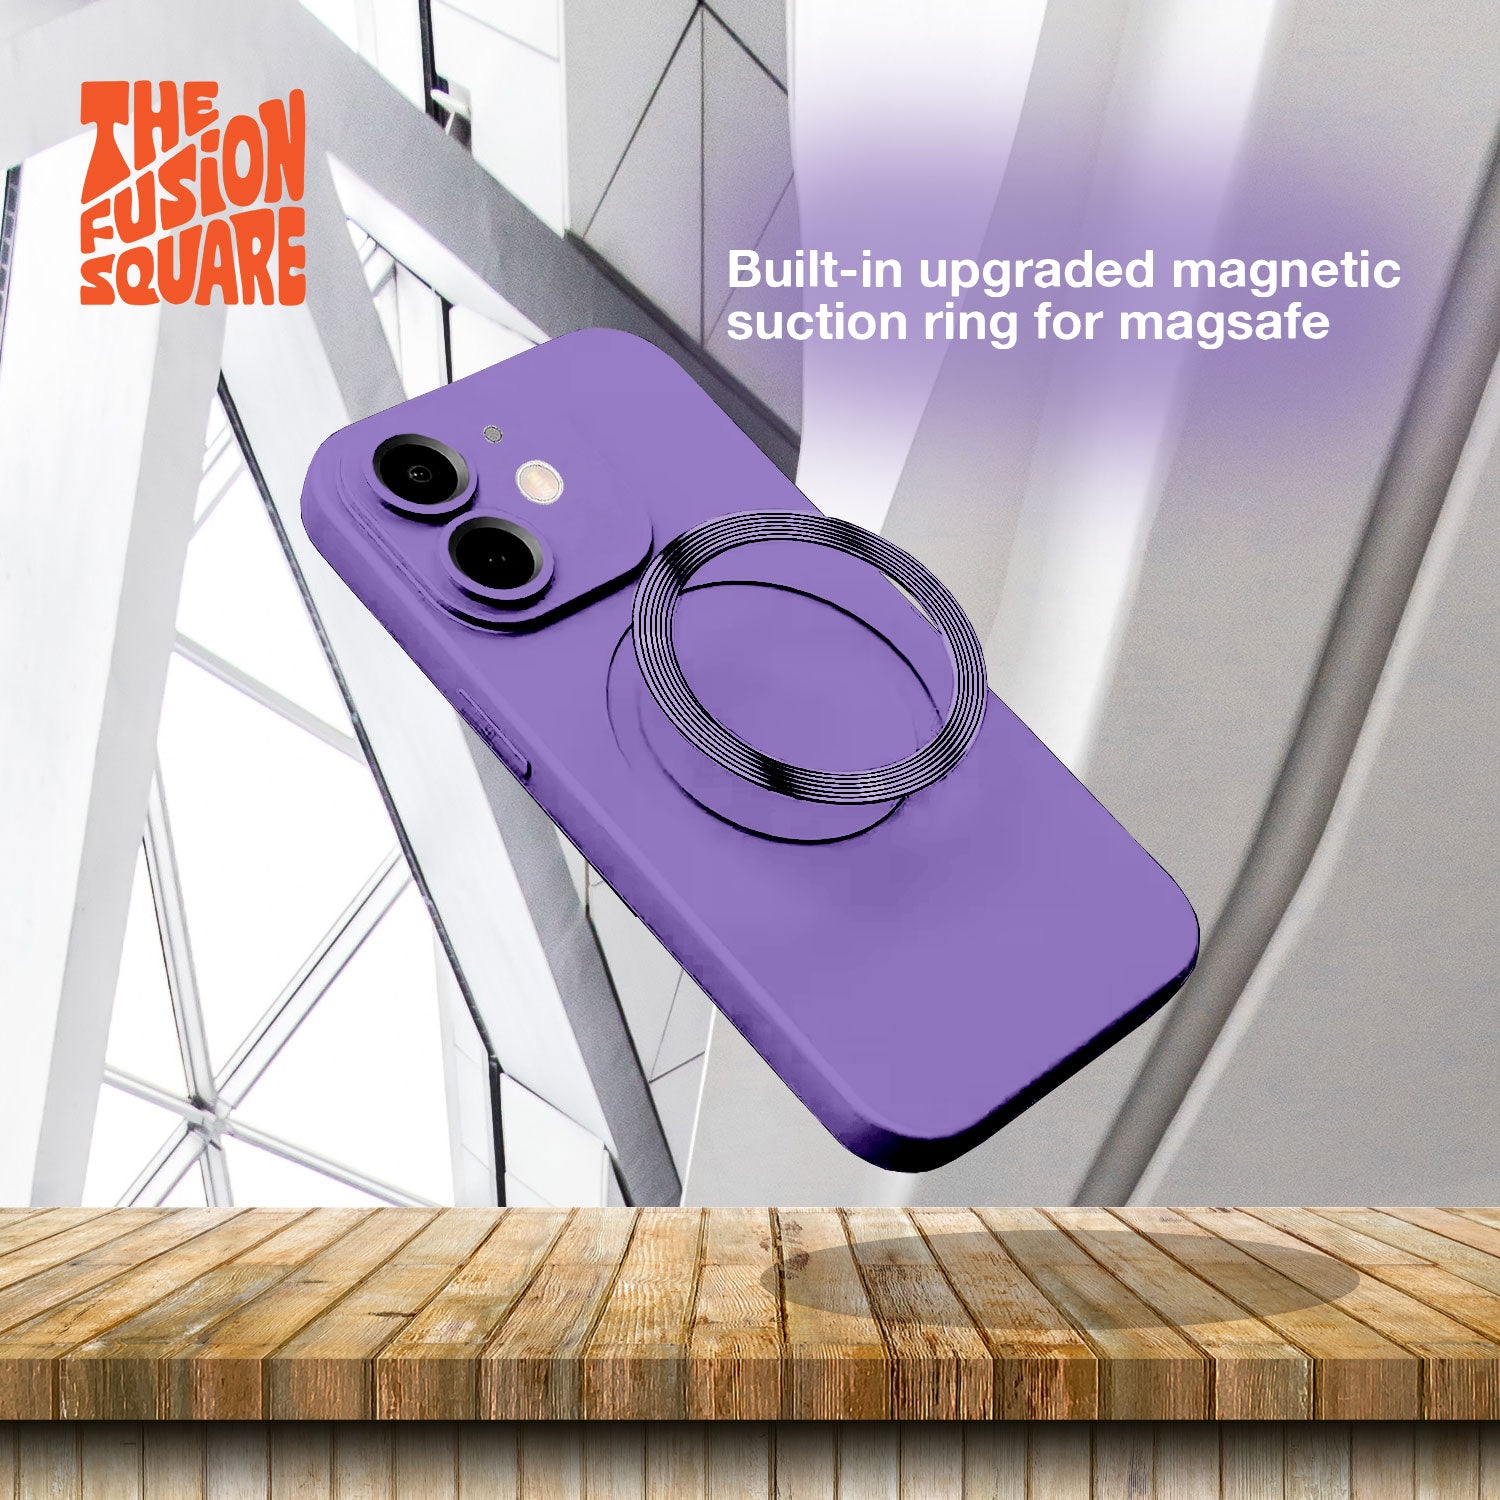 The Fusion Square Magnetic Wireless Silicone Phone Cases Shockproof Case for iPhone